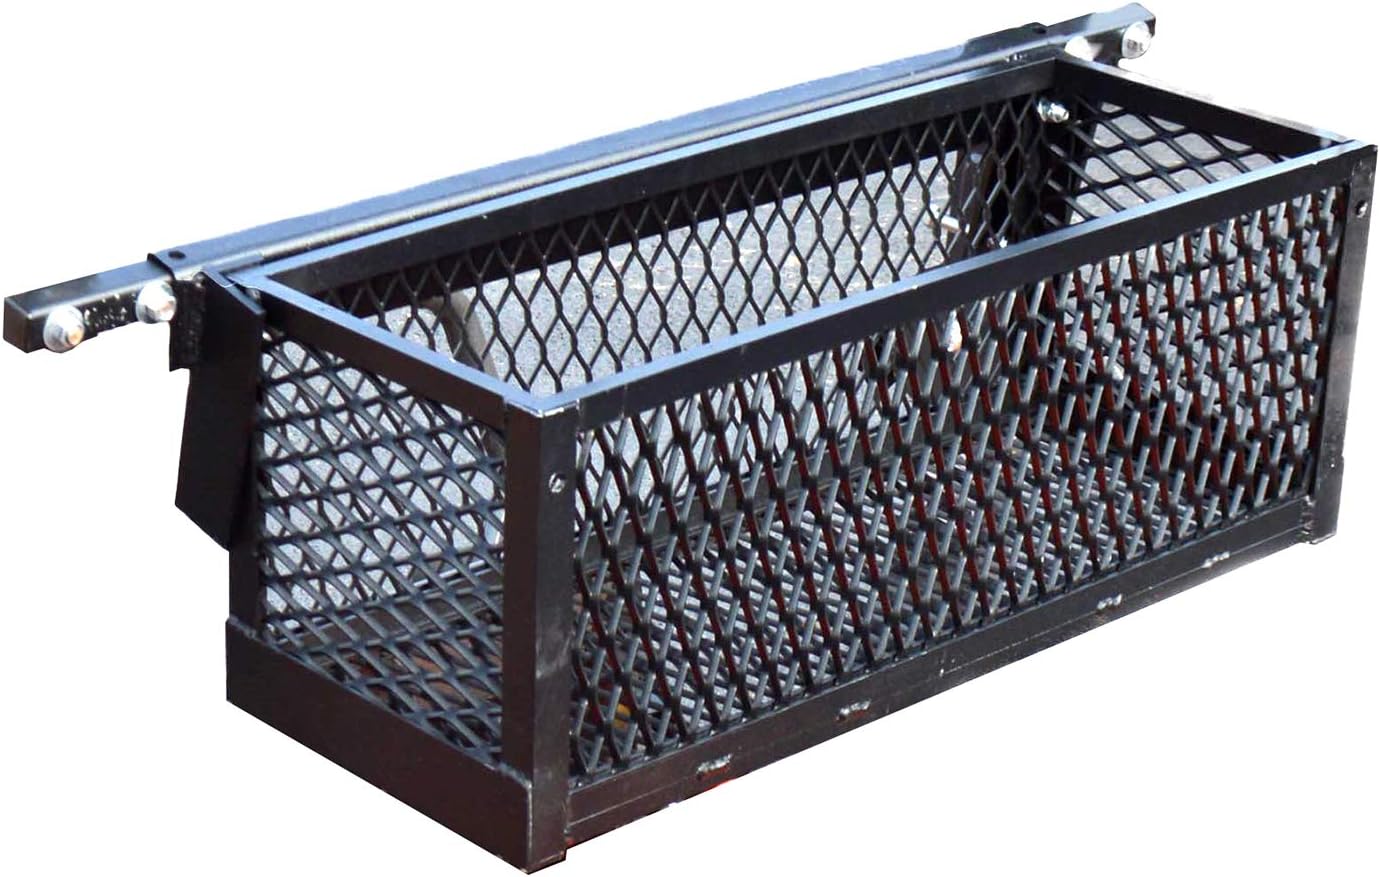 Great Day Universal-Fitting 24x10x10in Tractor Tool Tray, TT400, Black